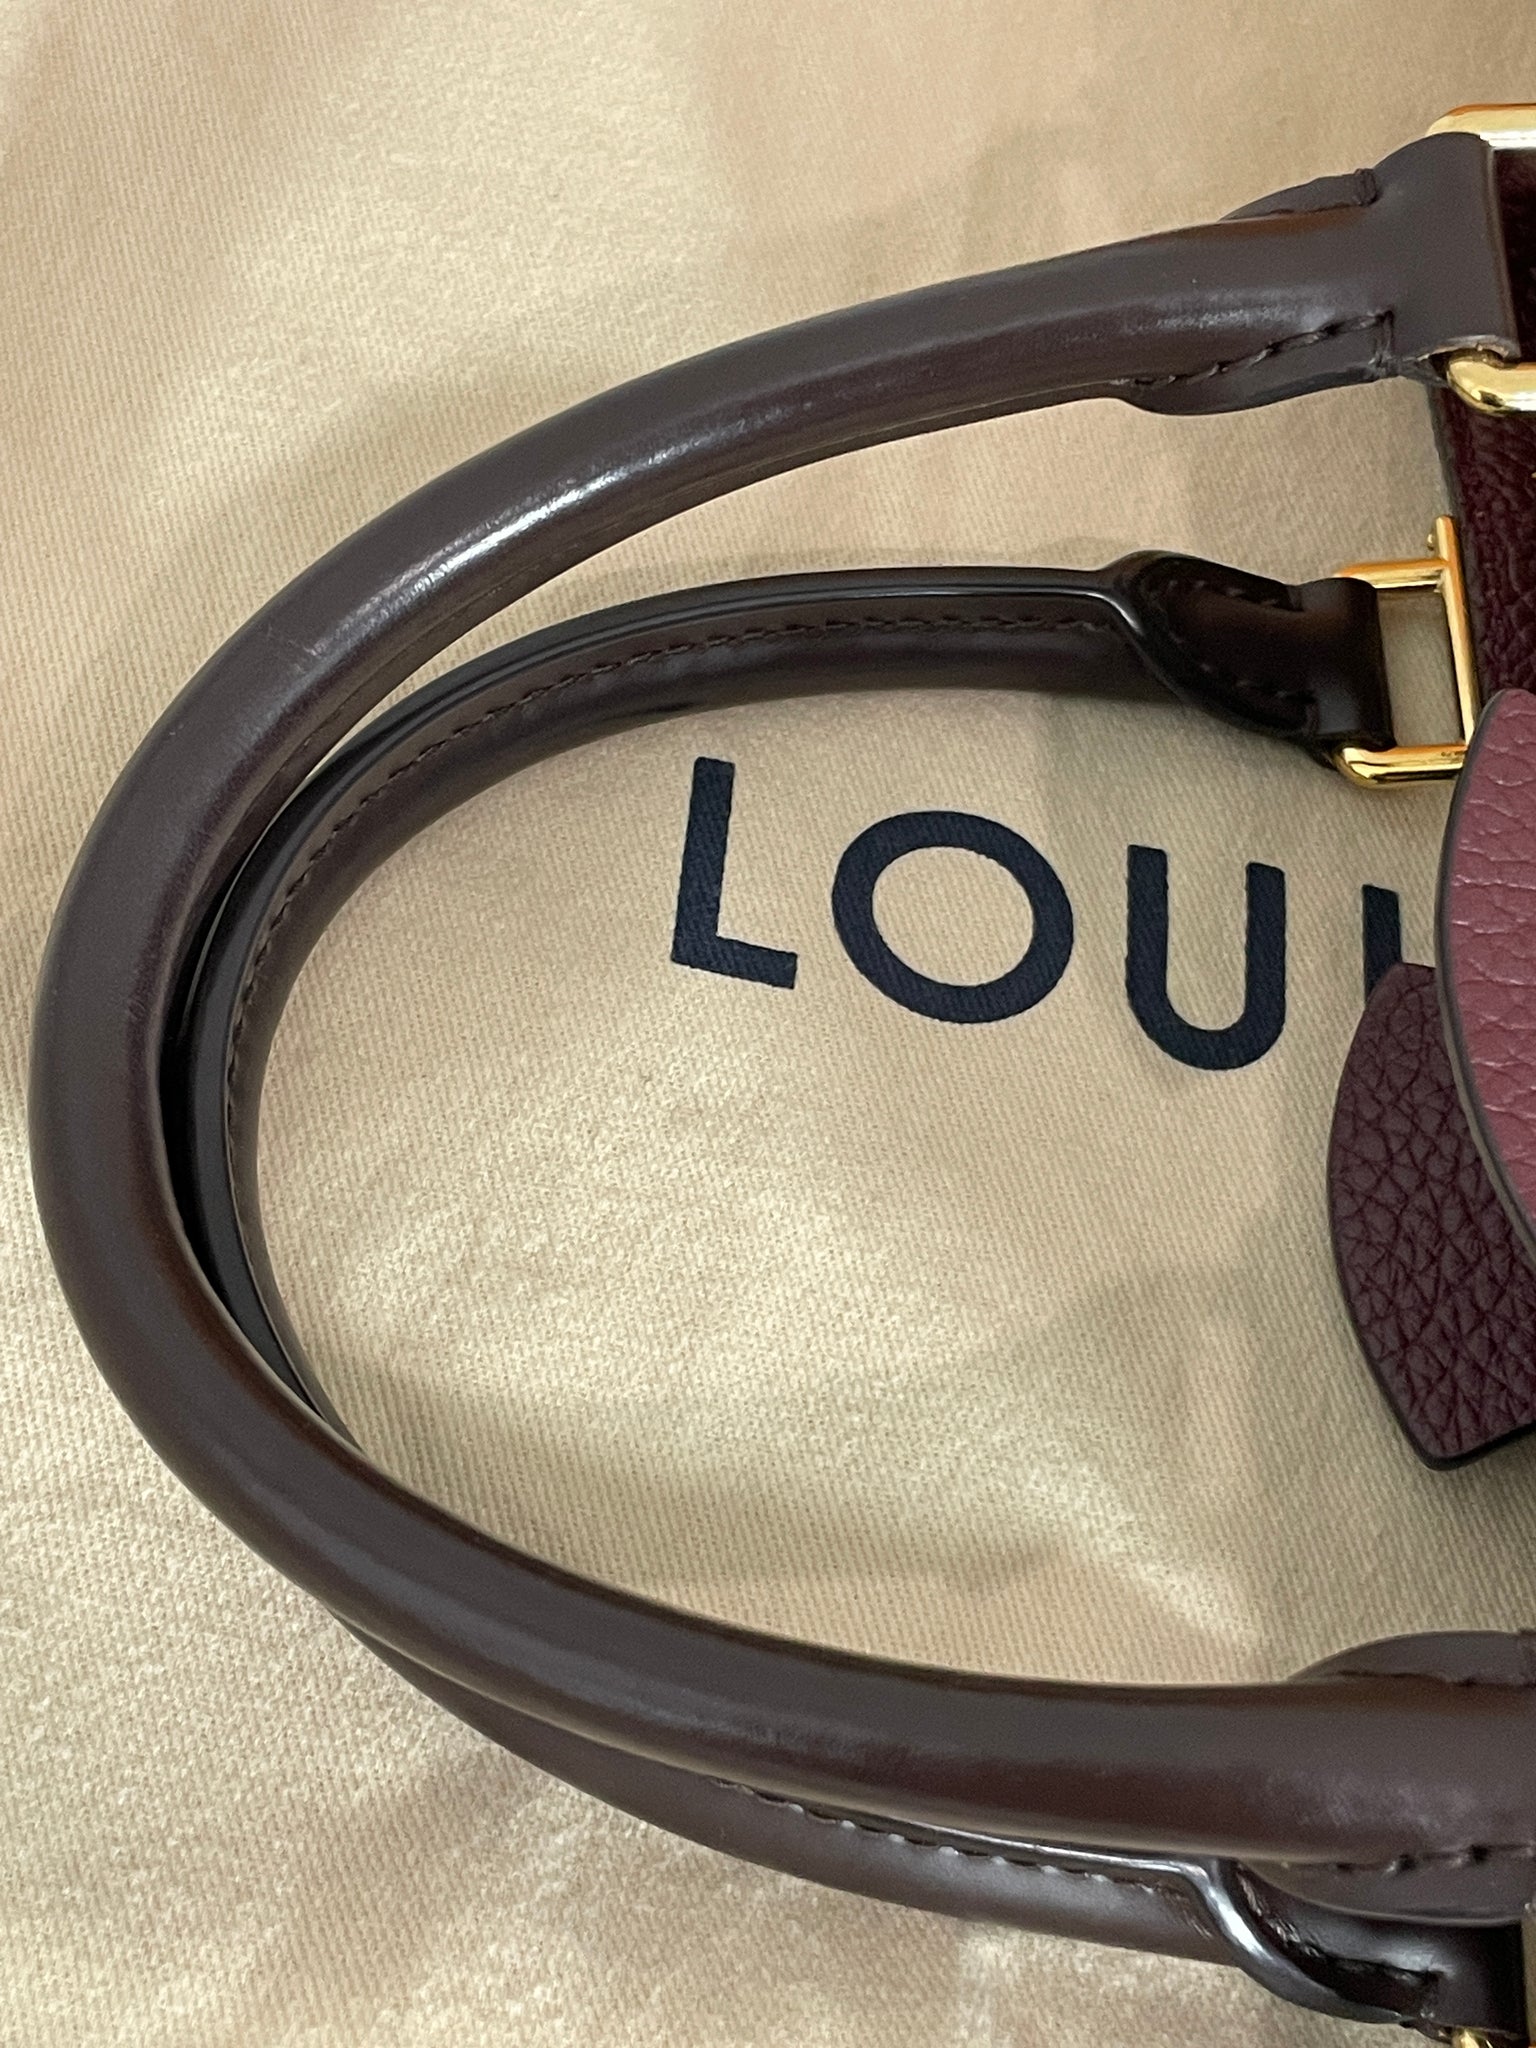 Louis Vuitton Damier Ebene Canvas with Burgandy Leather Brittany